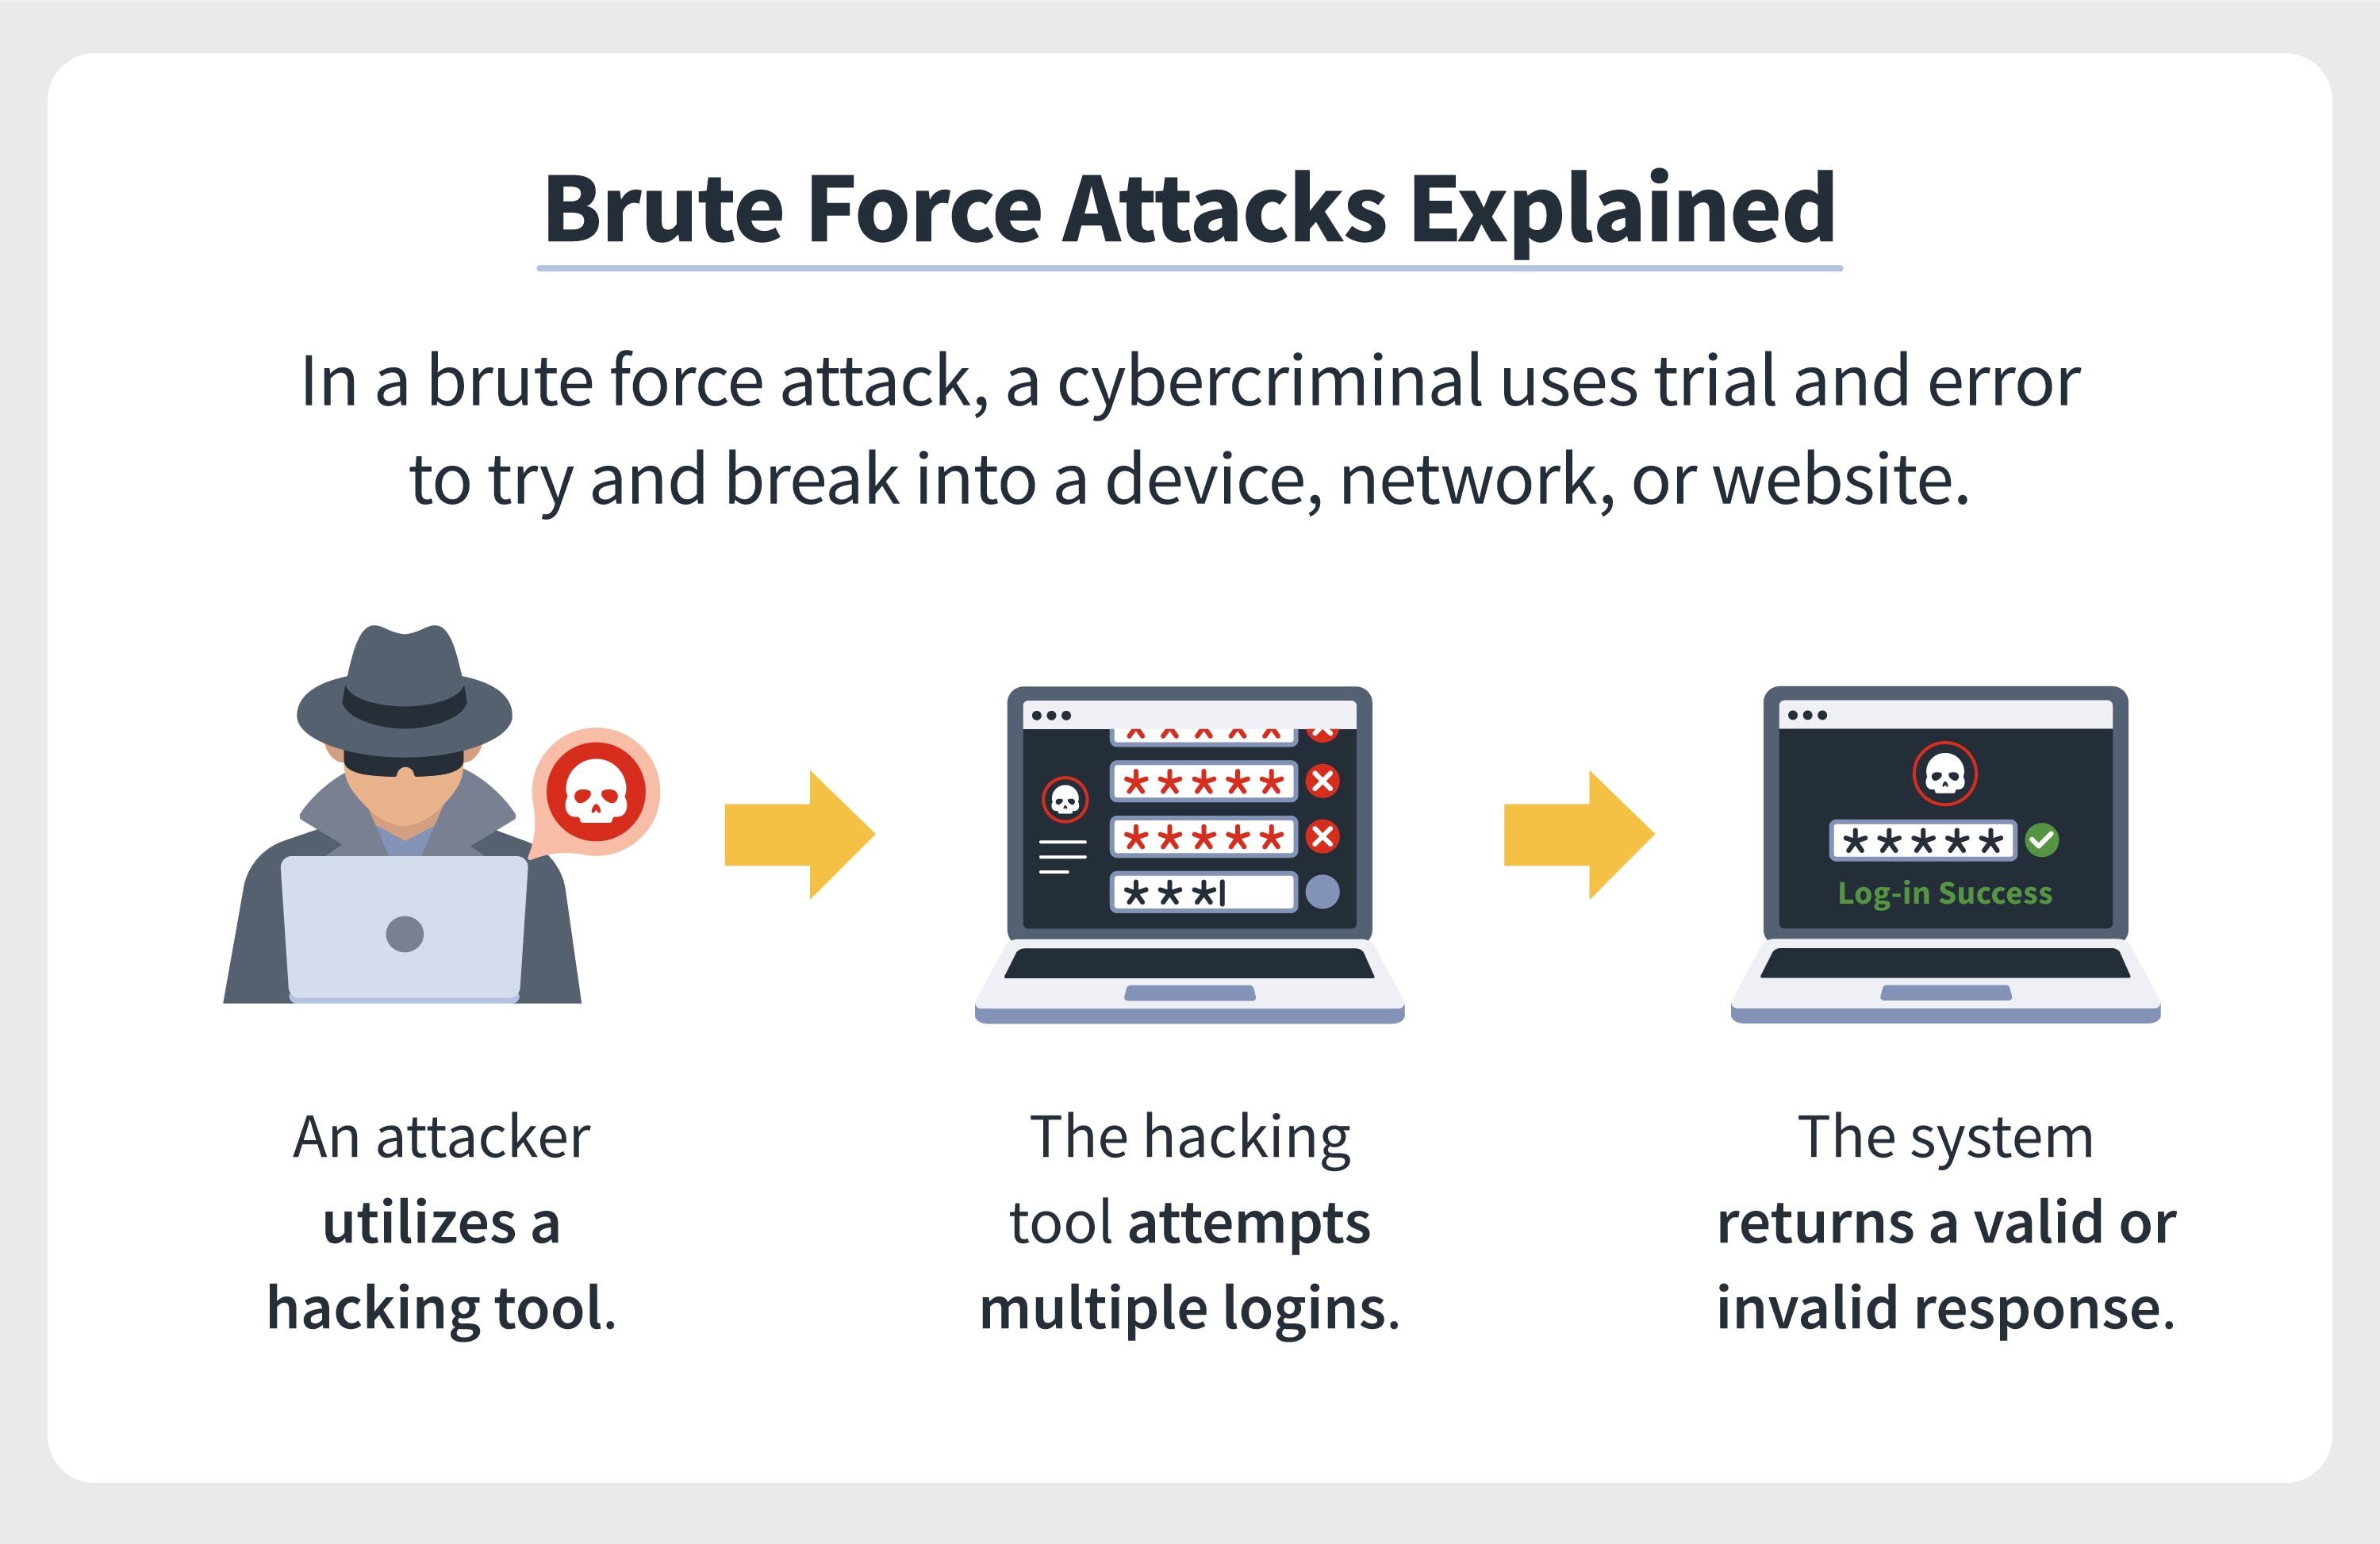 Illustrations accompany an explanation of how brute force attacks use trial and error to break into a device, network, or website.  